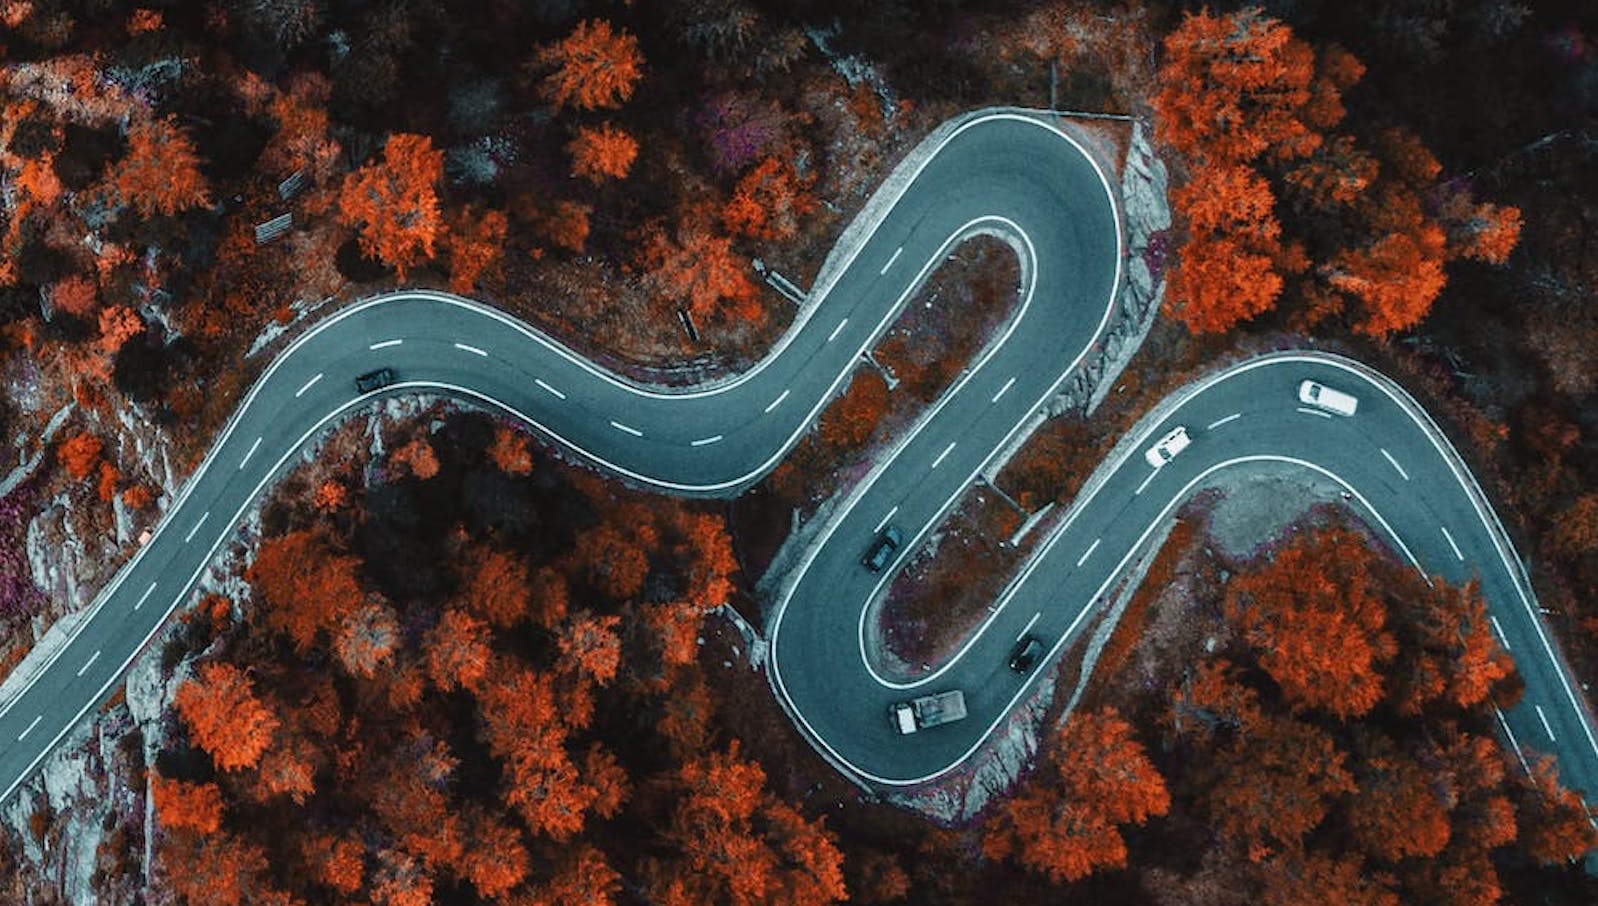 Overhead view of a winding country road with cars on it among tall red trees